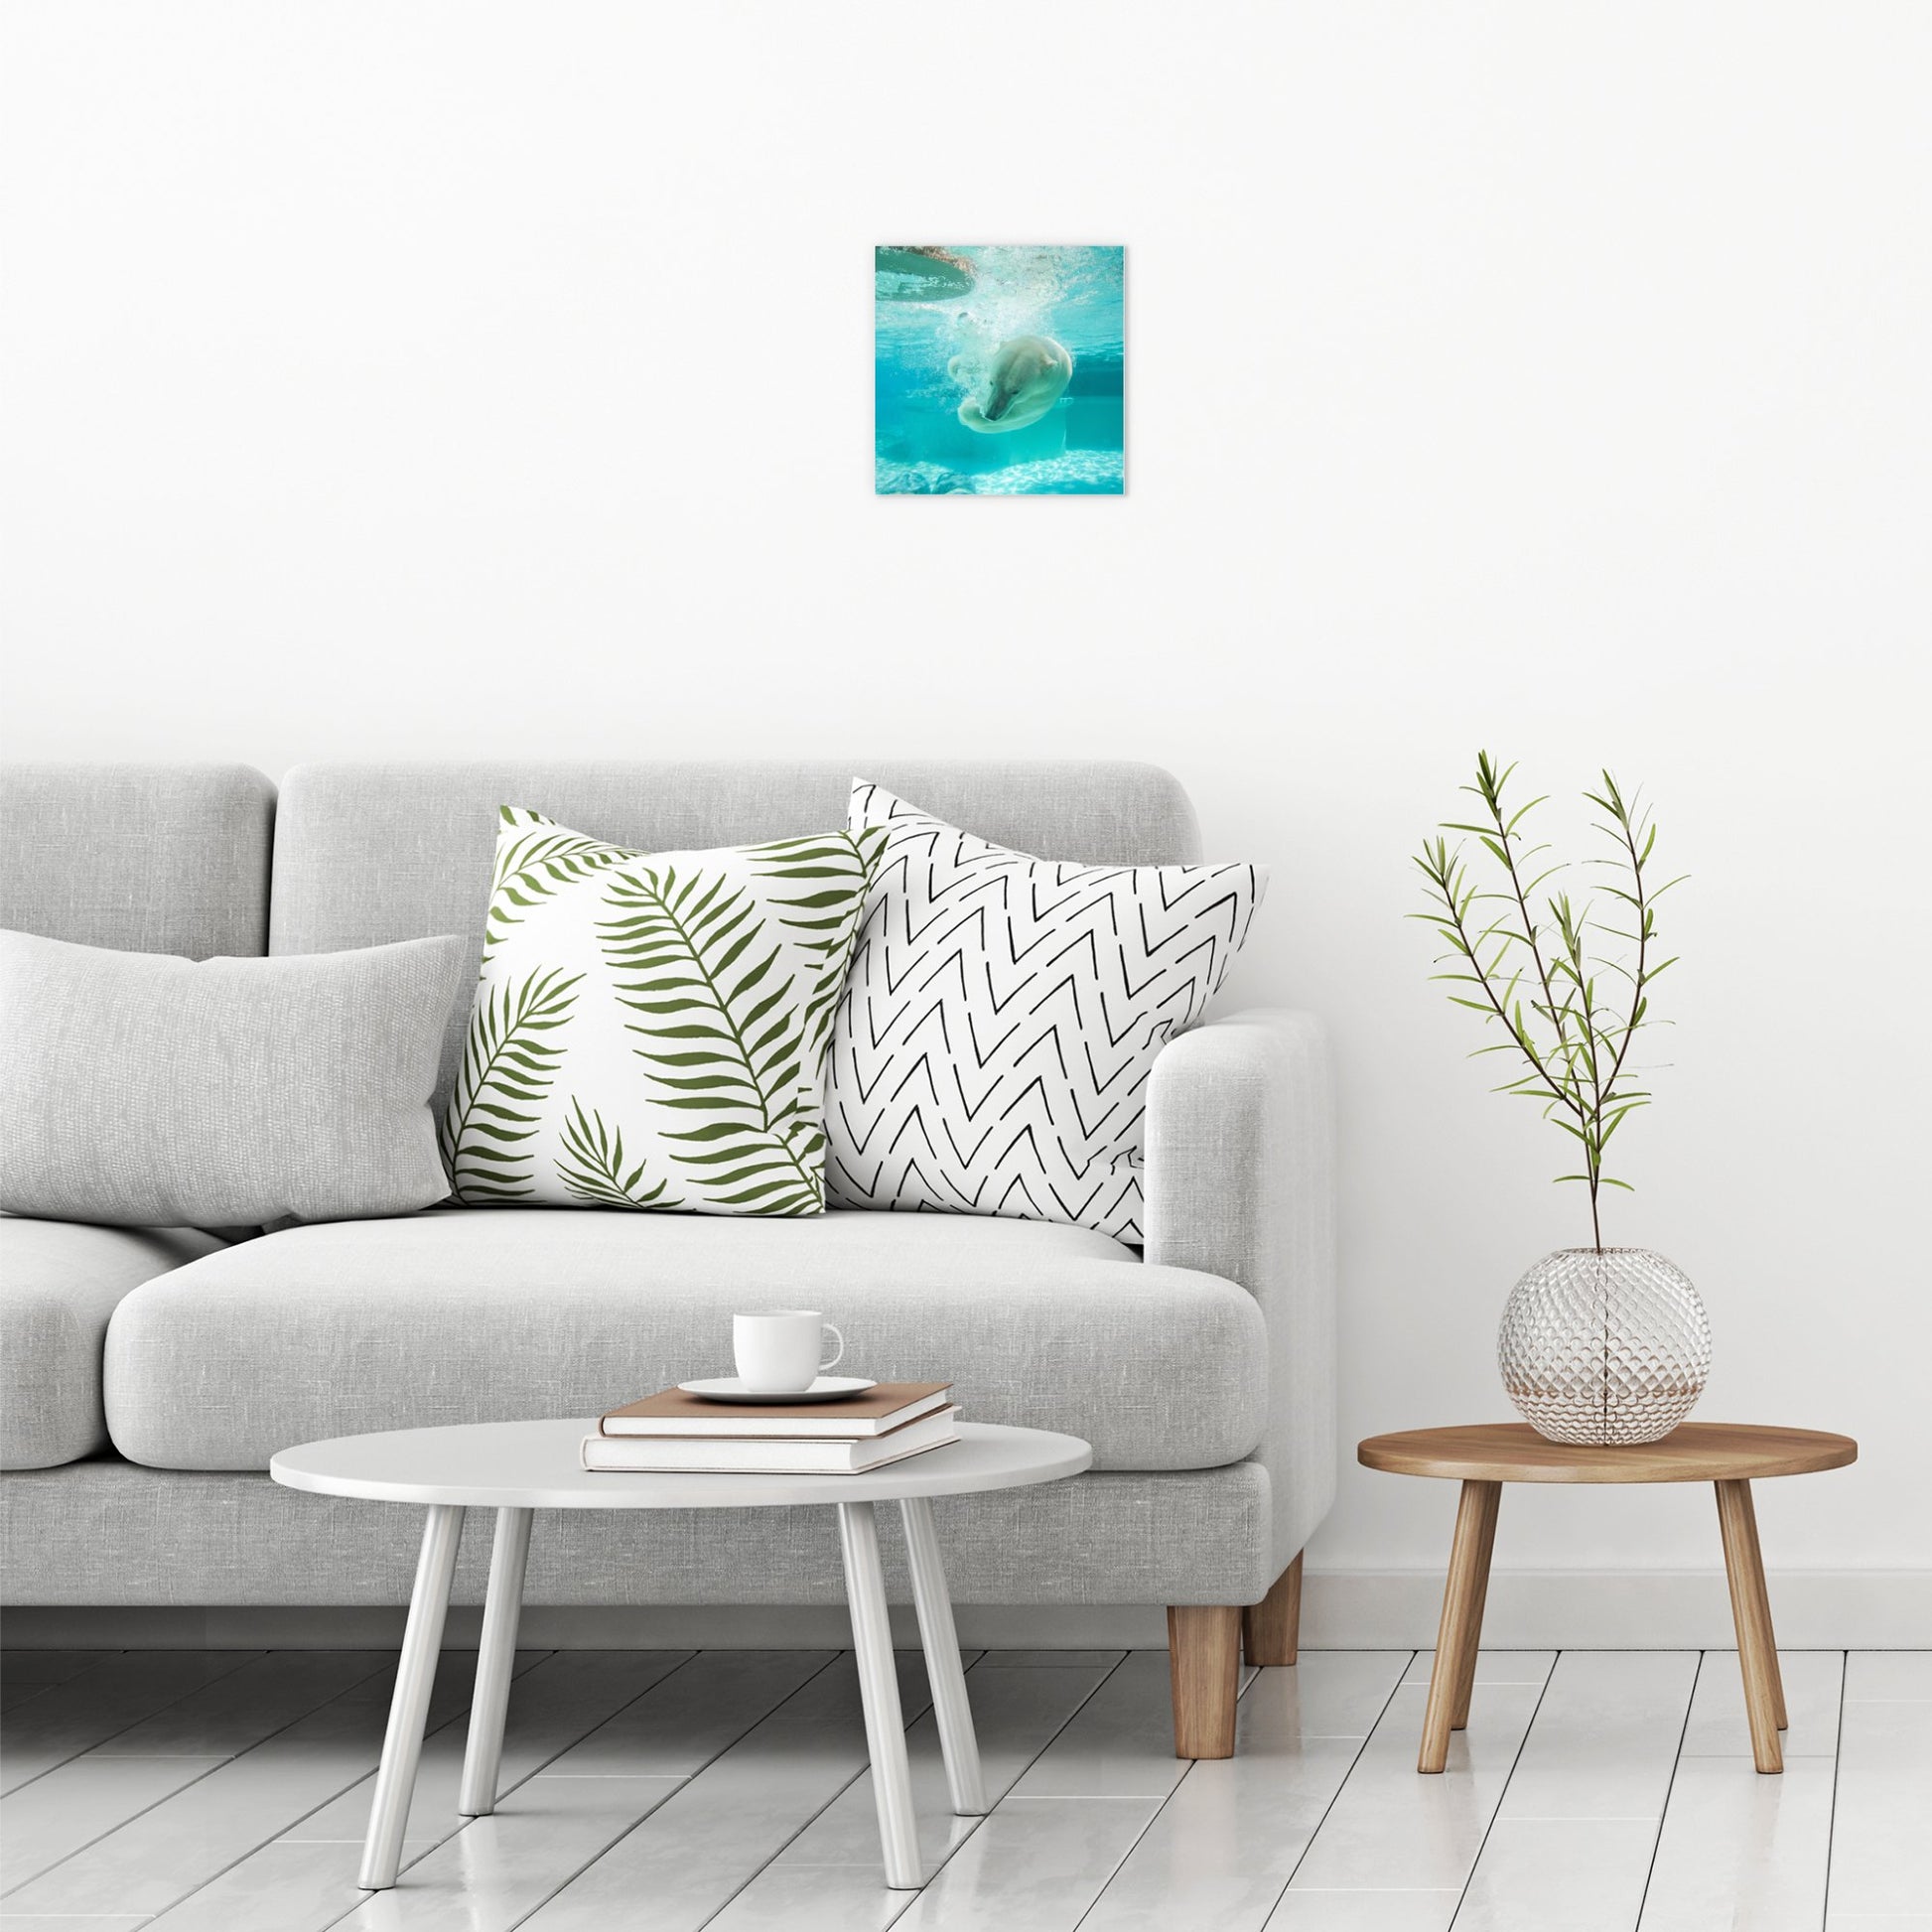 A contemporary modern room view showing a small size metal art poster display plate with printed design of a Polar Bear Under Water